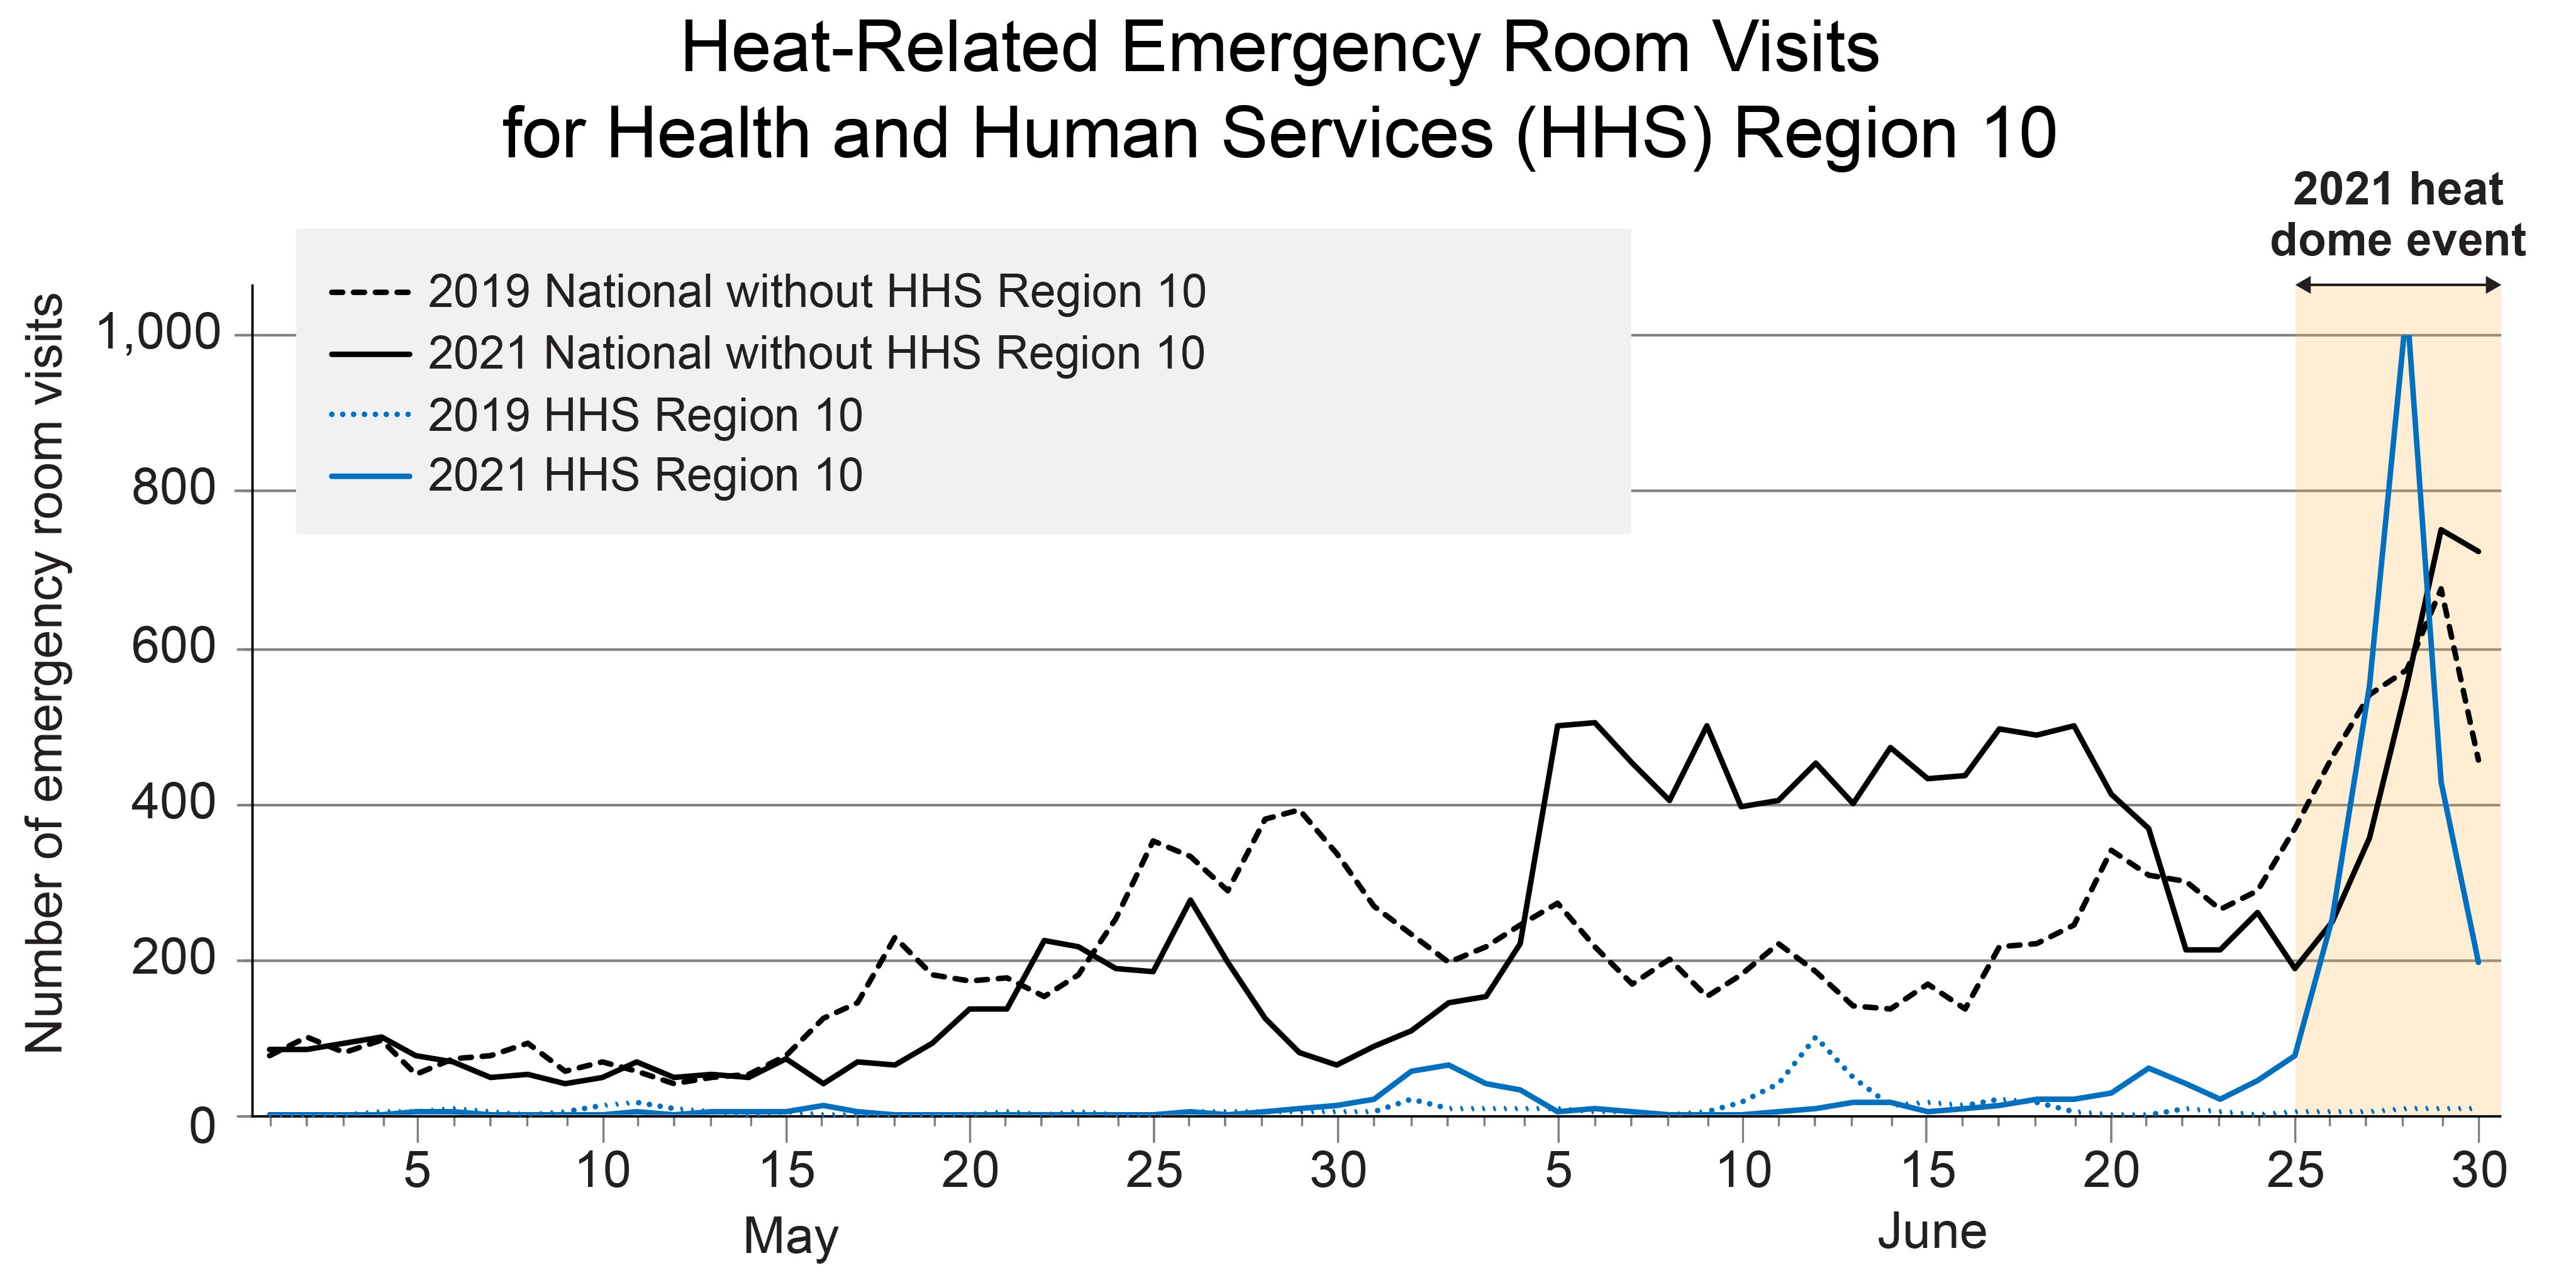 Heat-Related Emergency Room Visits for Health and Human Services (HHS) Region 10